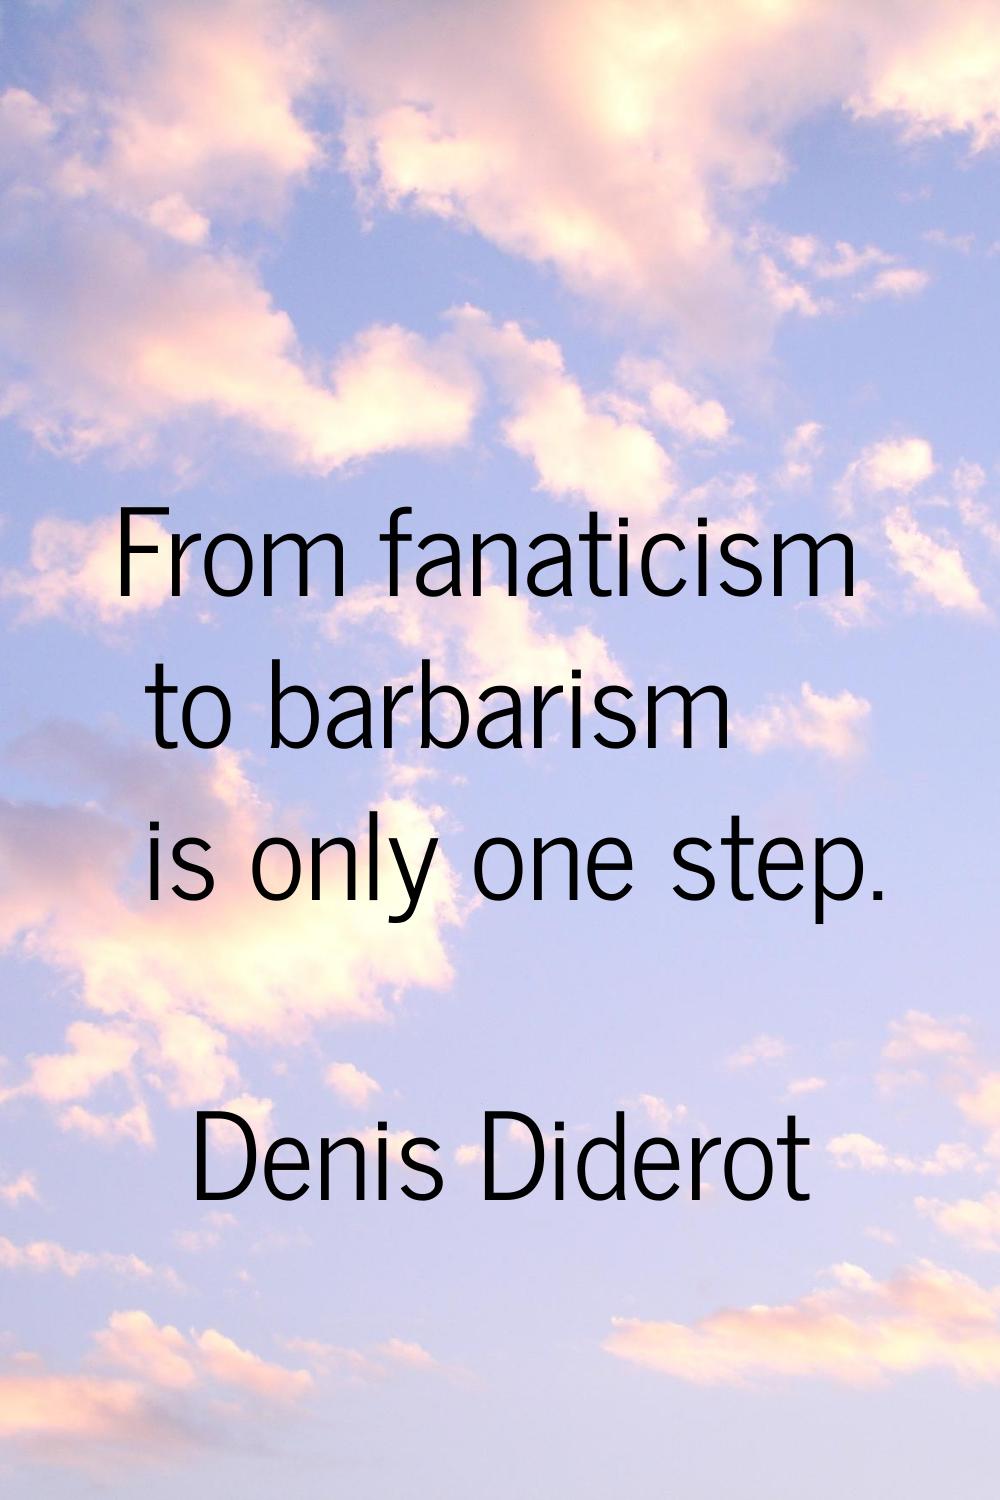 From fanaticism to barbarism is only one step.